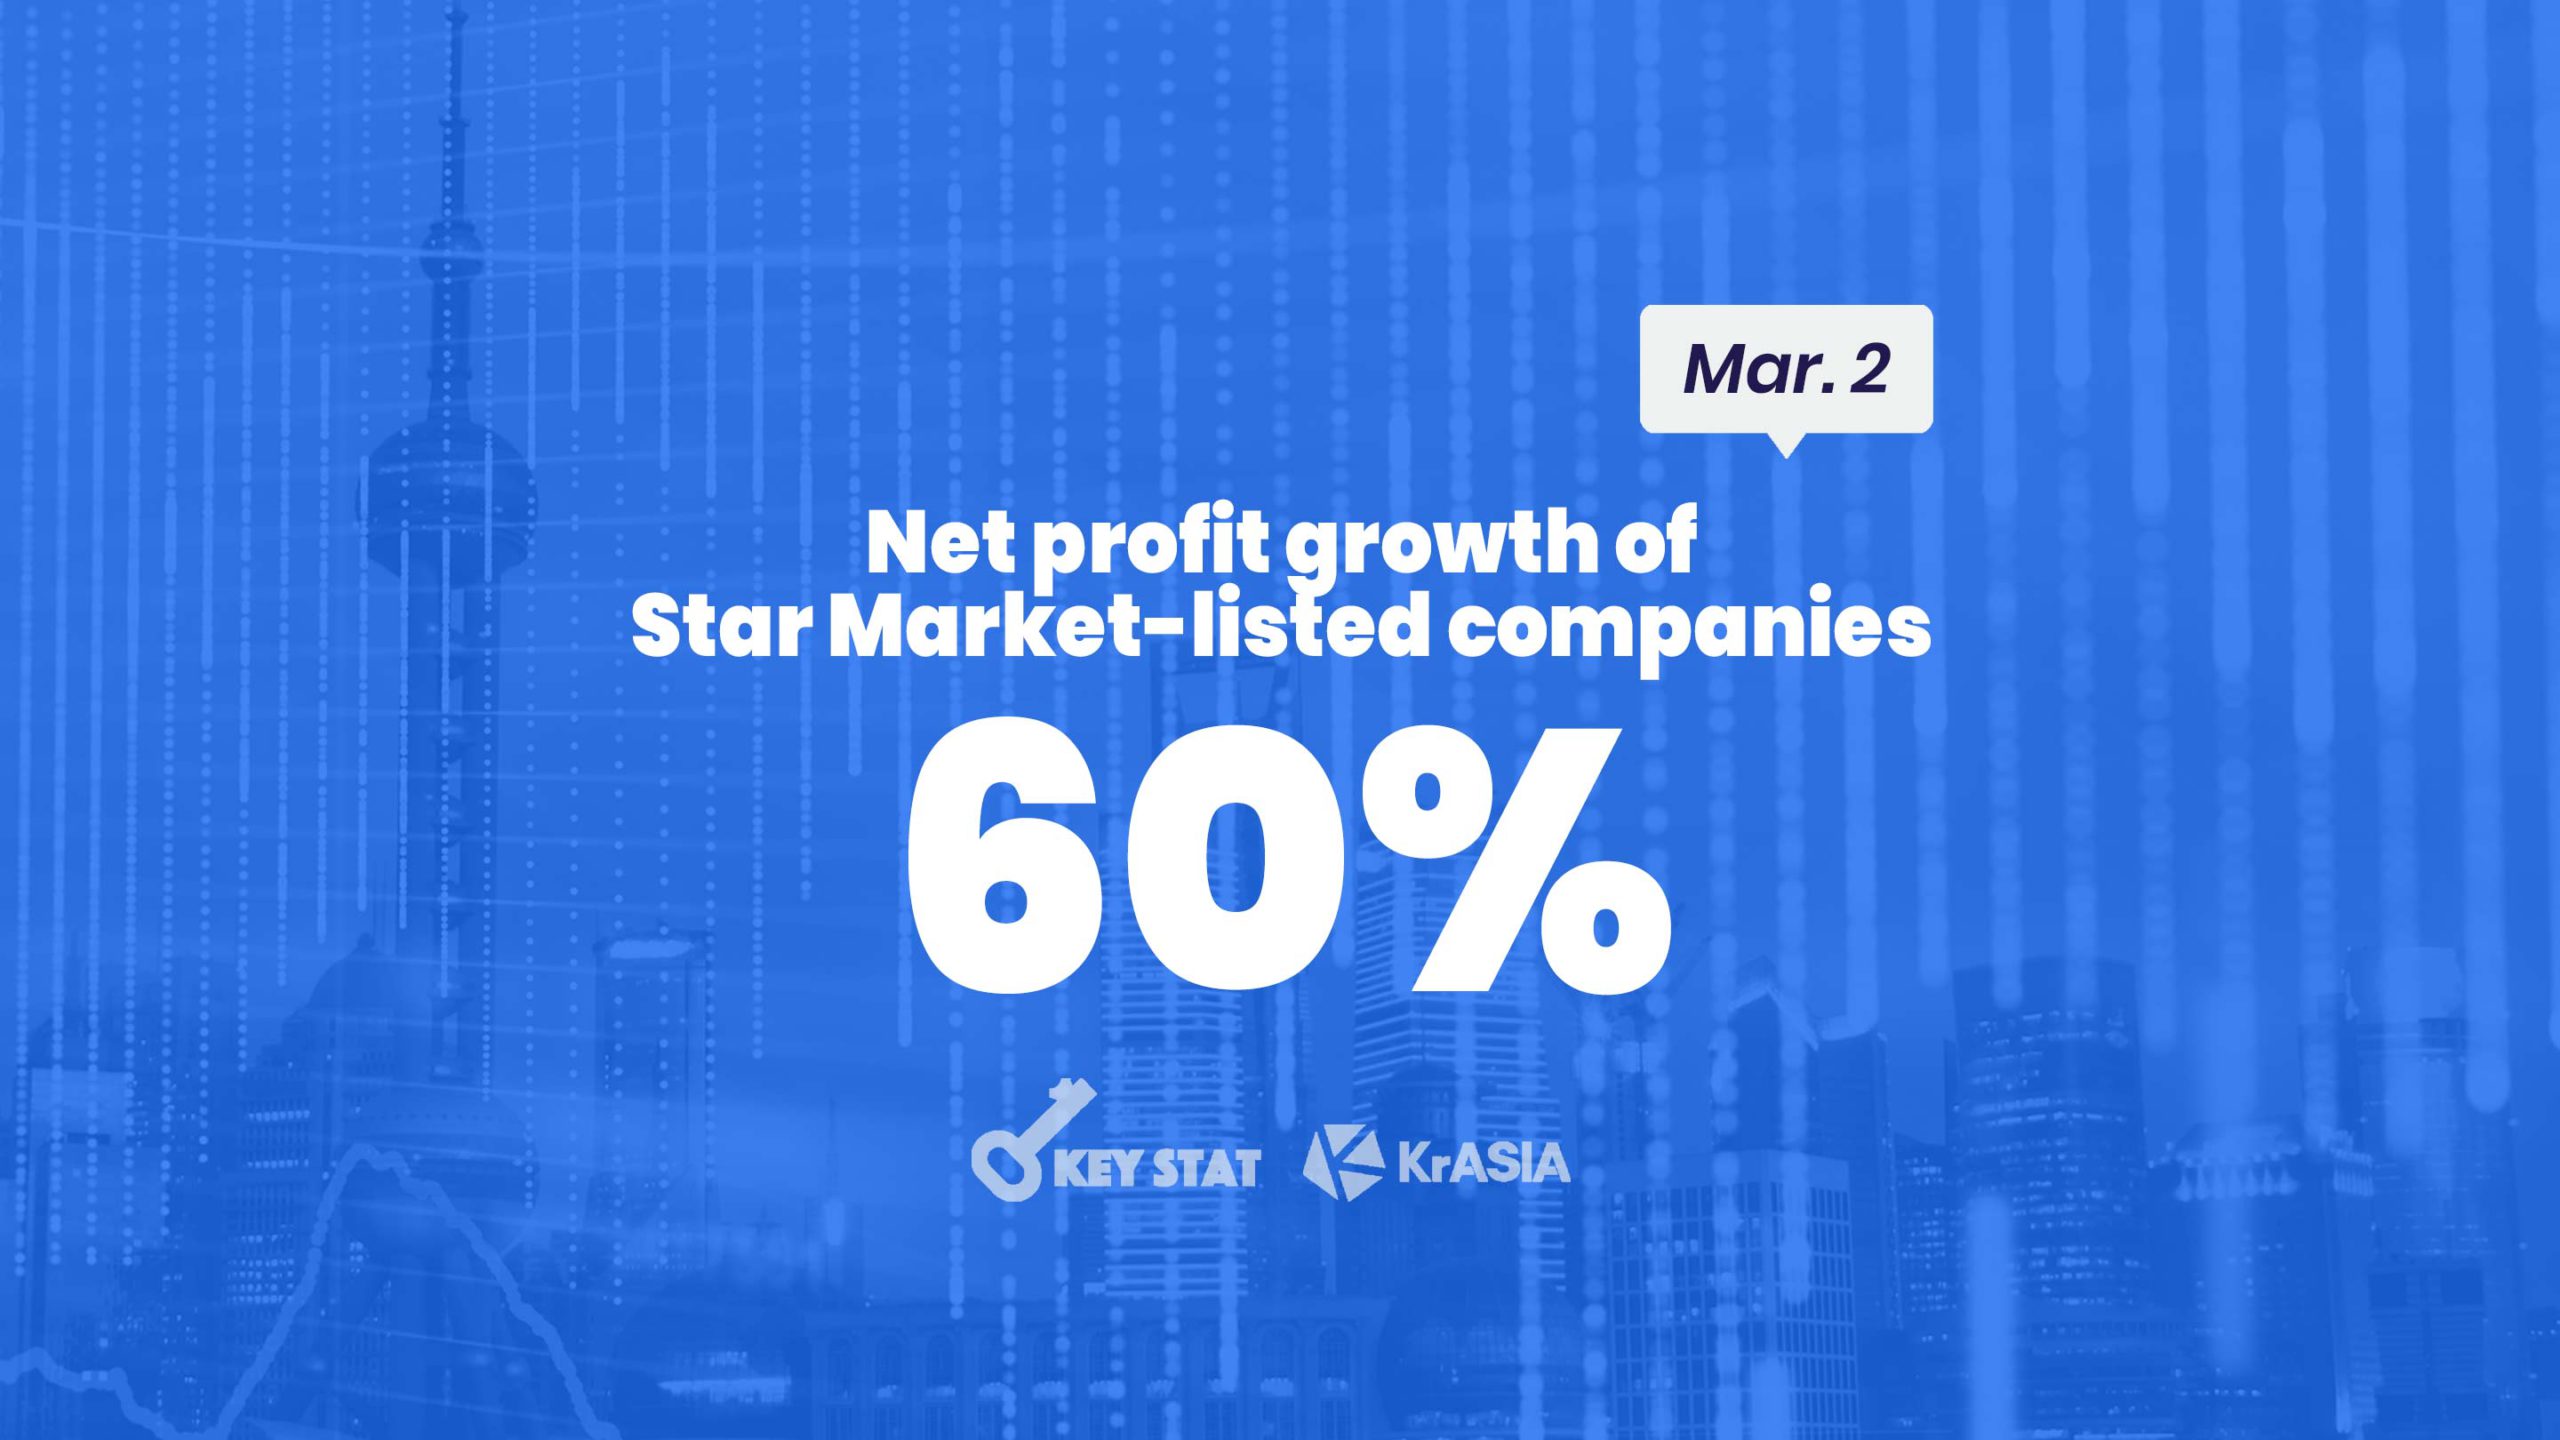 KEY STAT | Star Market-listed companies show robust growth in 2020